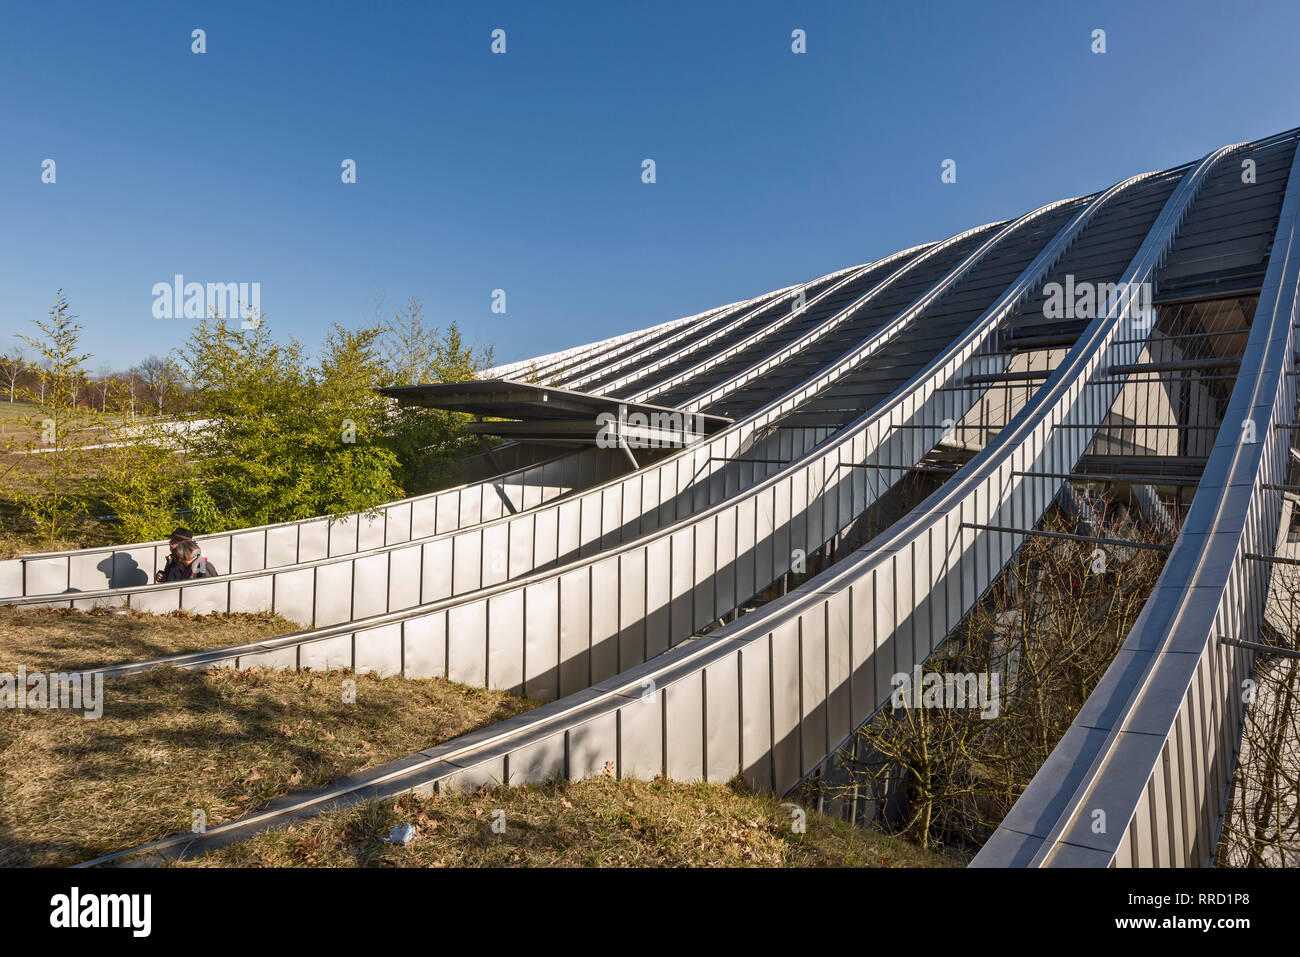 the capital of Switzerland has a new emblem, the Zentrum Paul Klee. The  museum was designed by Renzo Piano in the form of a wave in Bern,  Switzerland Stock Photo - Alamy